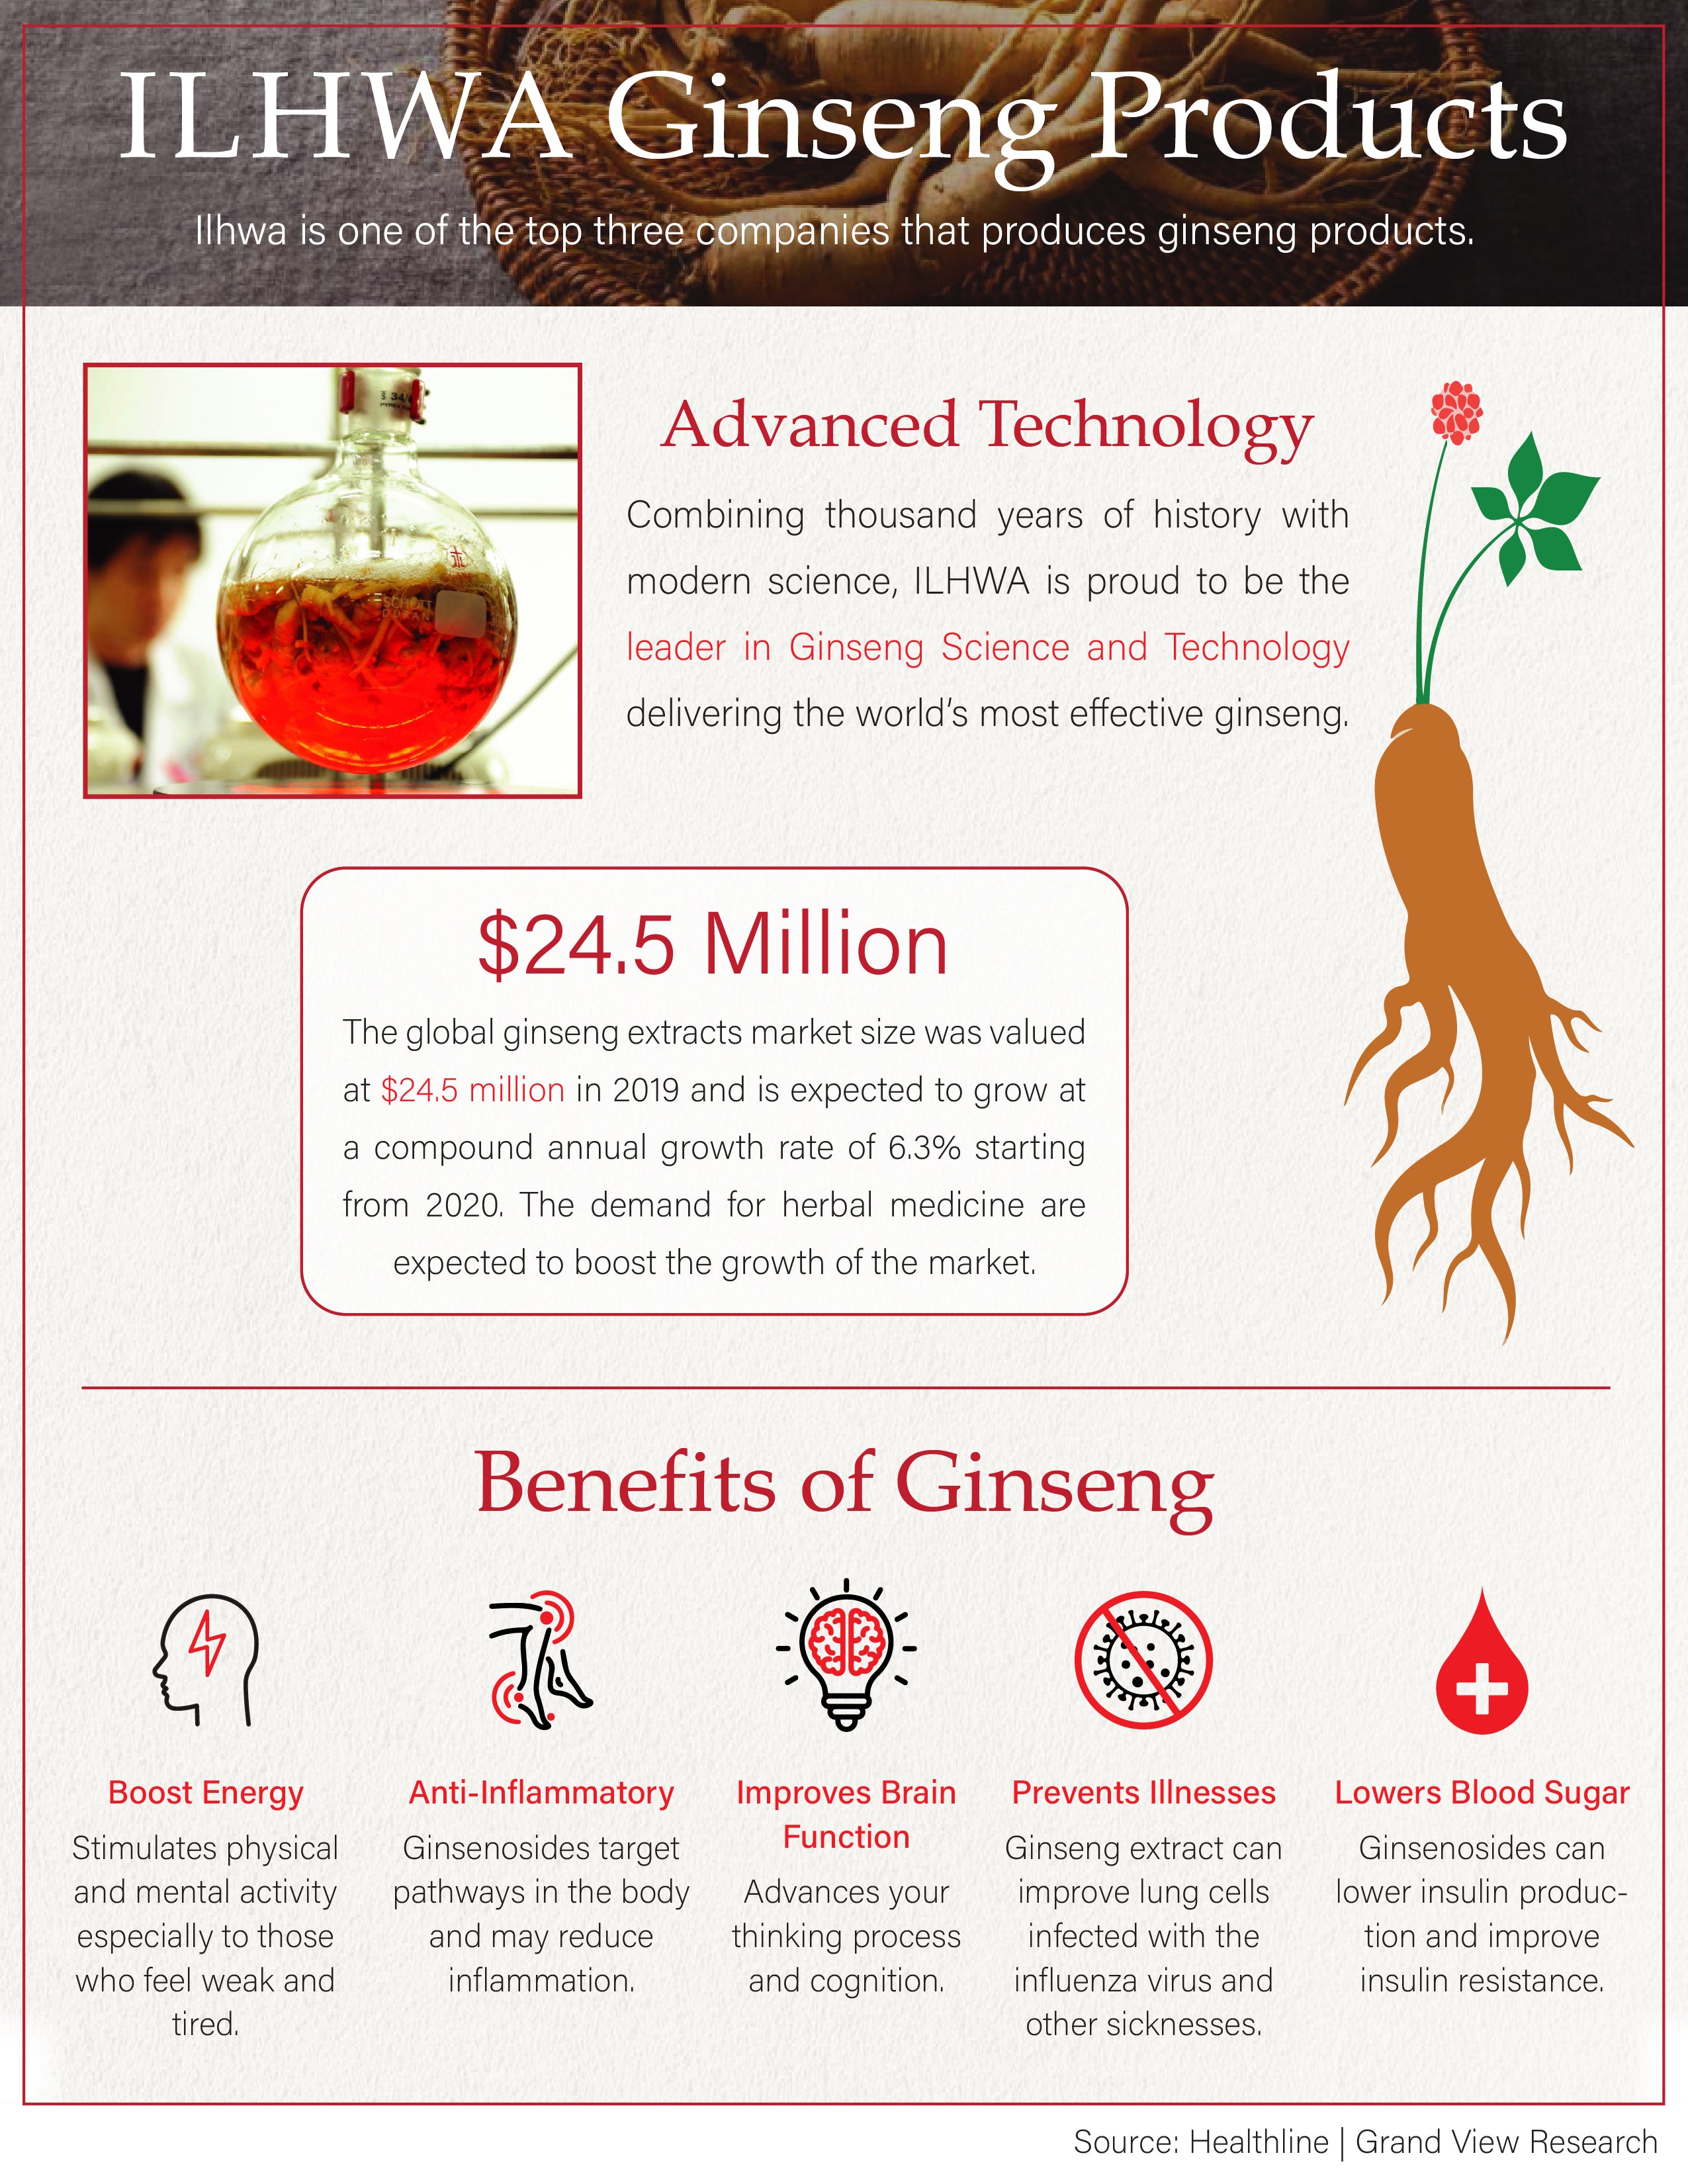 GINST15 Korean Red Ginseng Extract